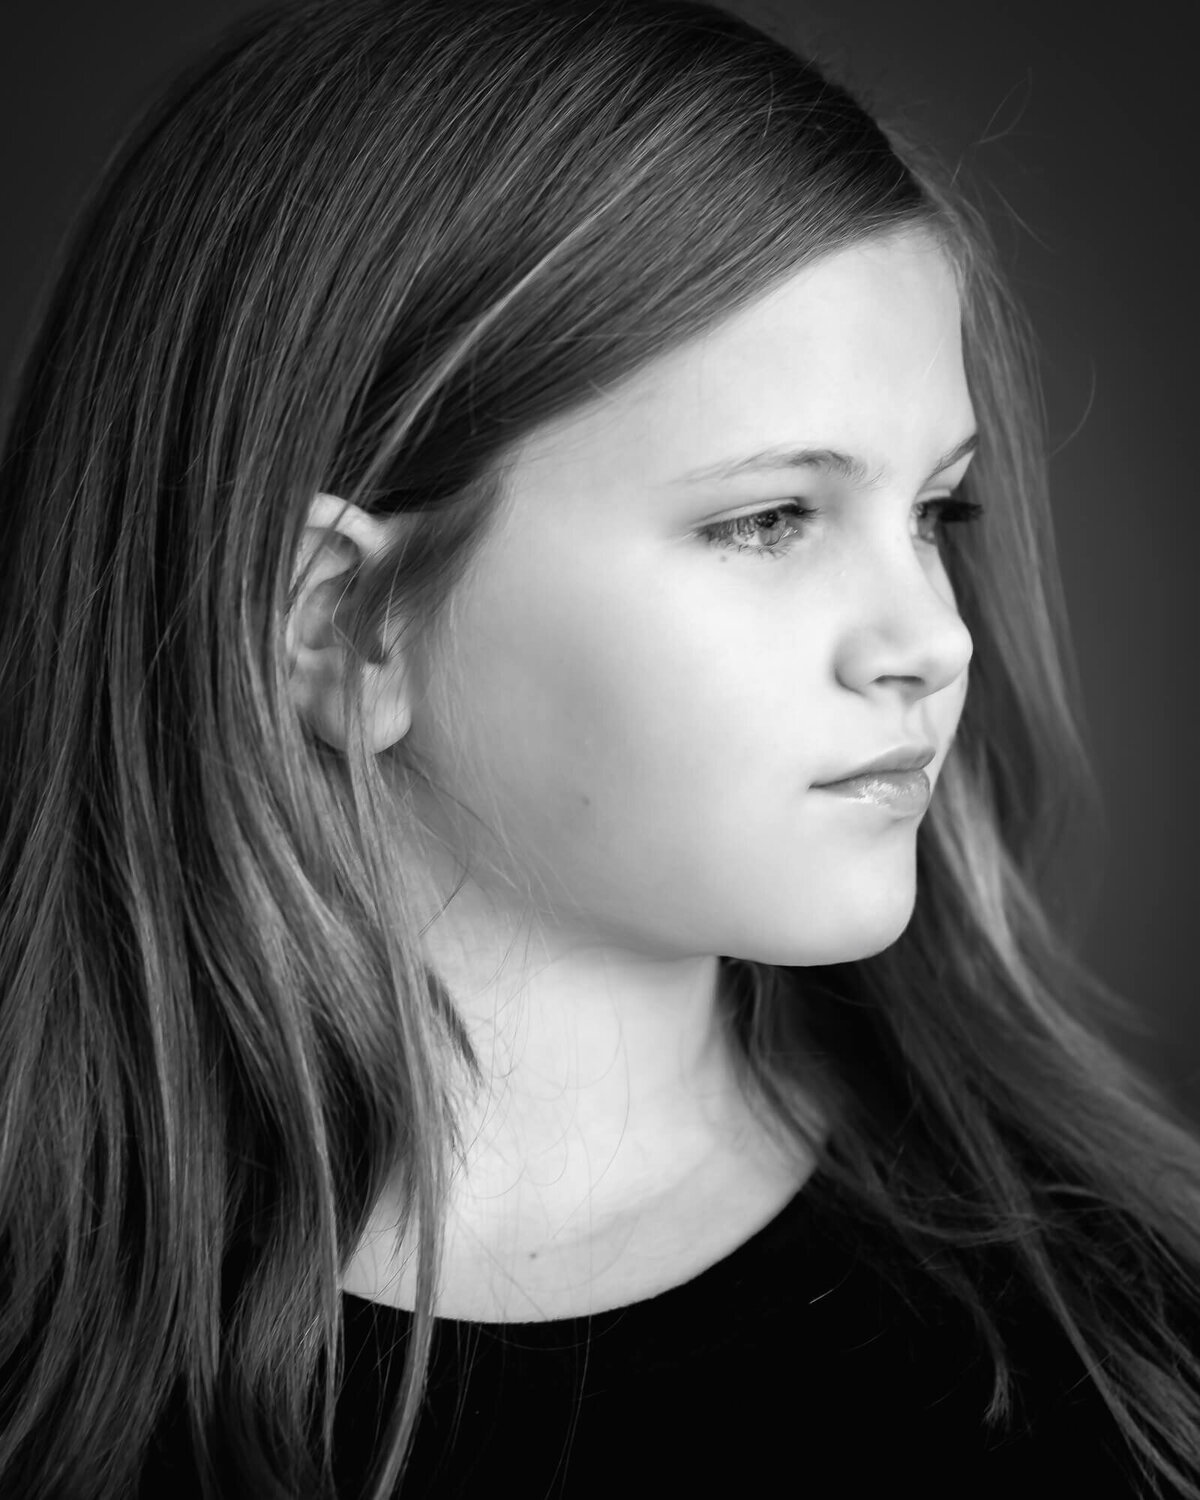 personality portrait in black and white of a 10 year old girl's profile with a serious face captured by Allison Amores Photography